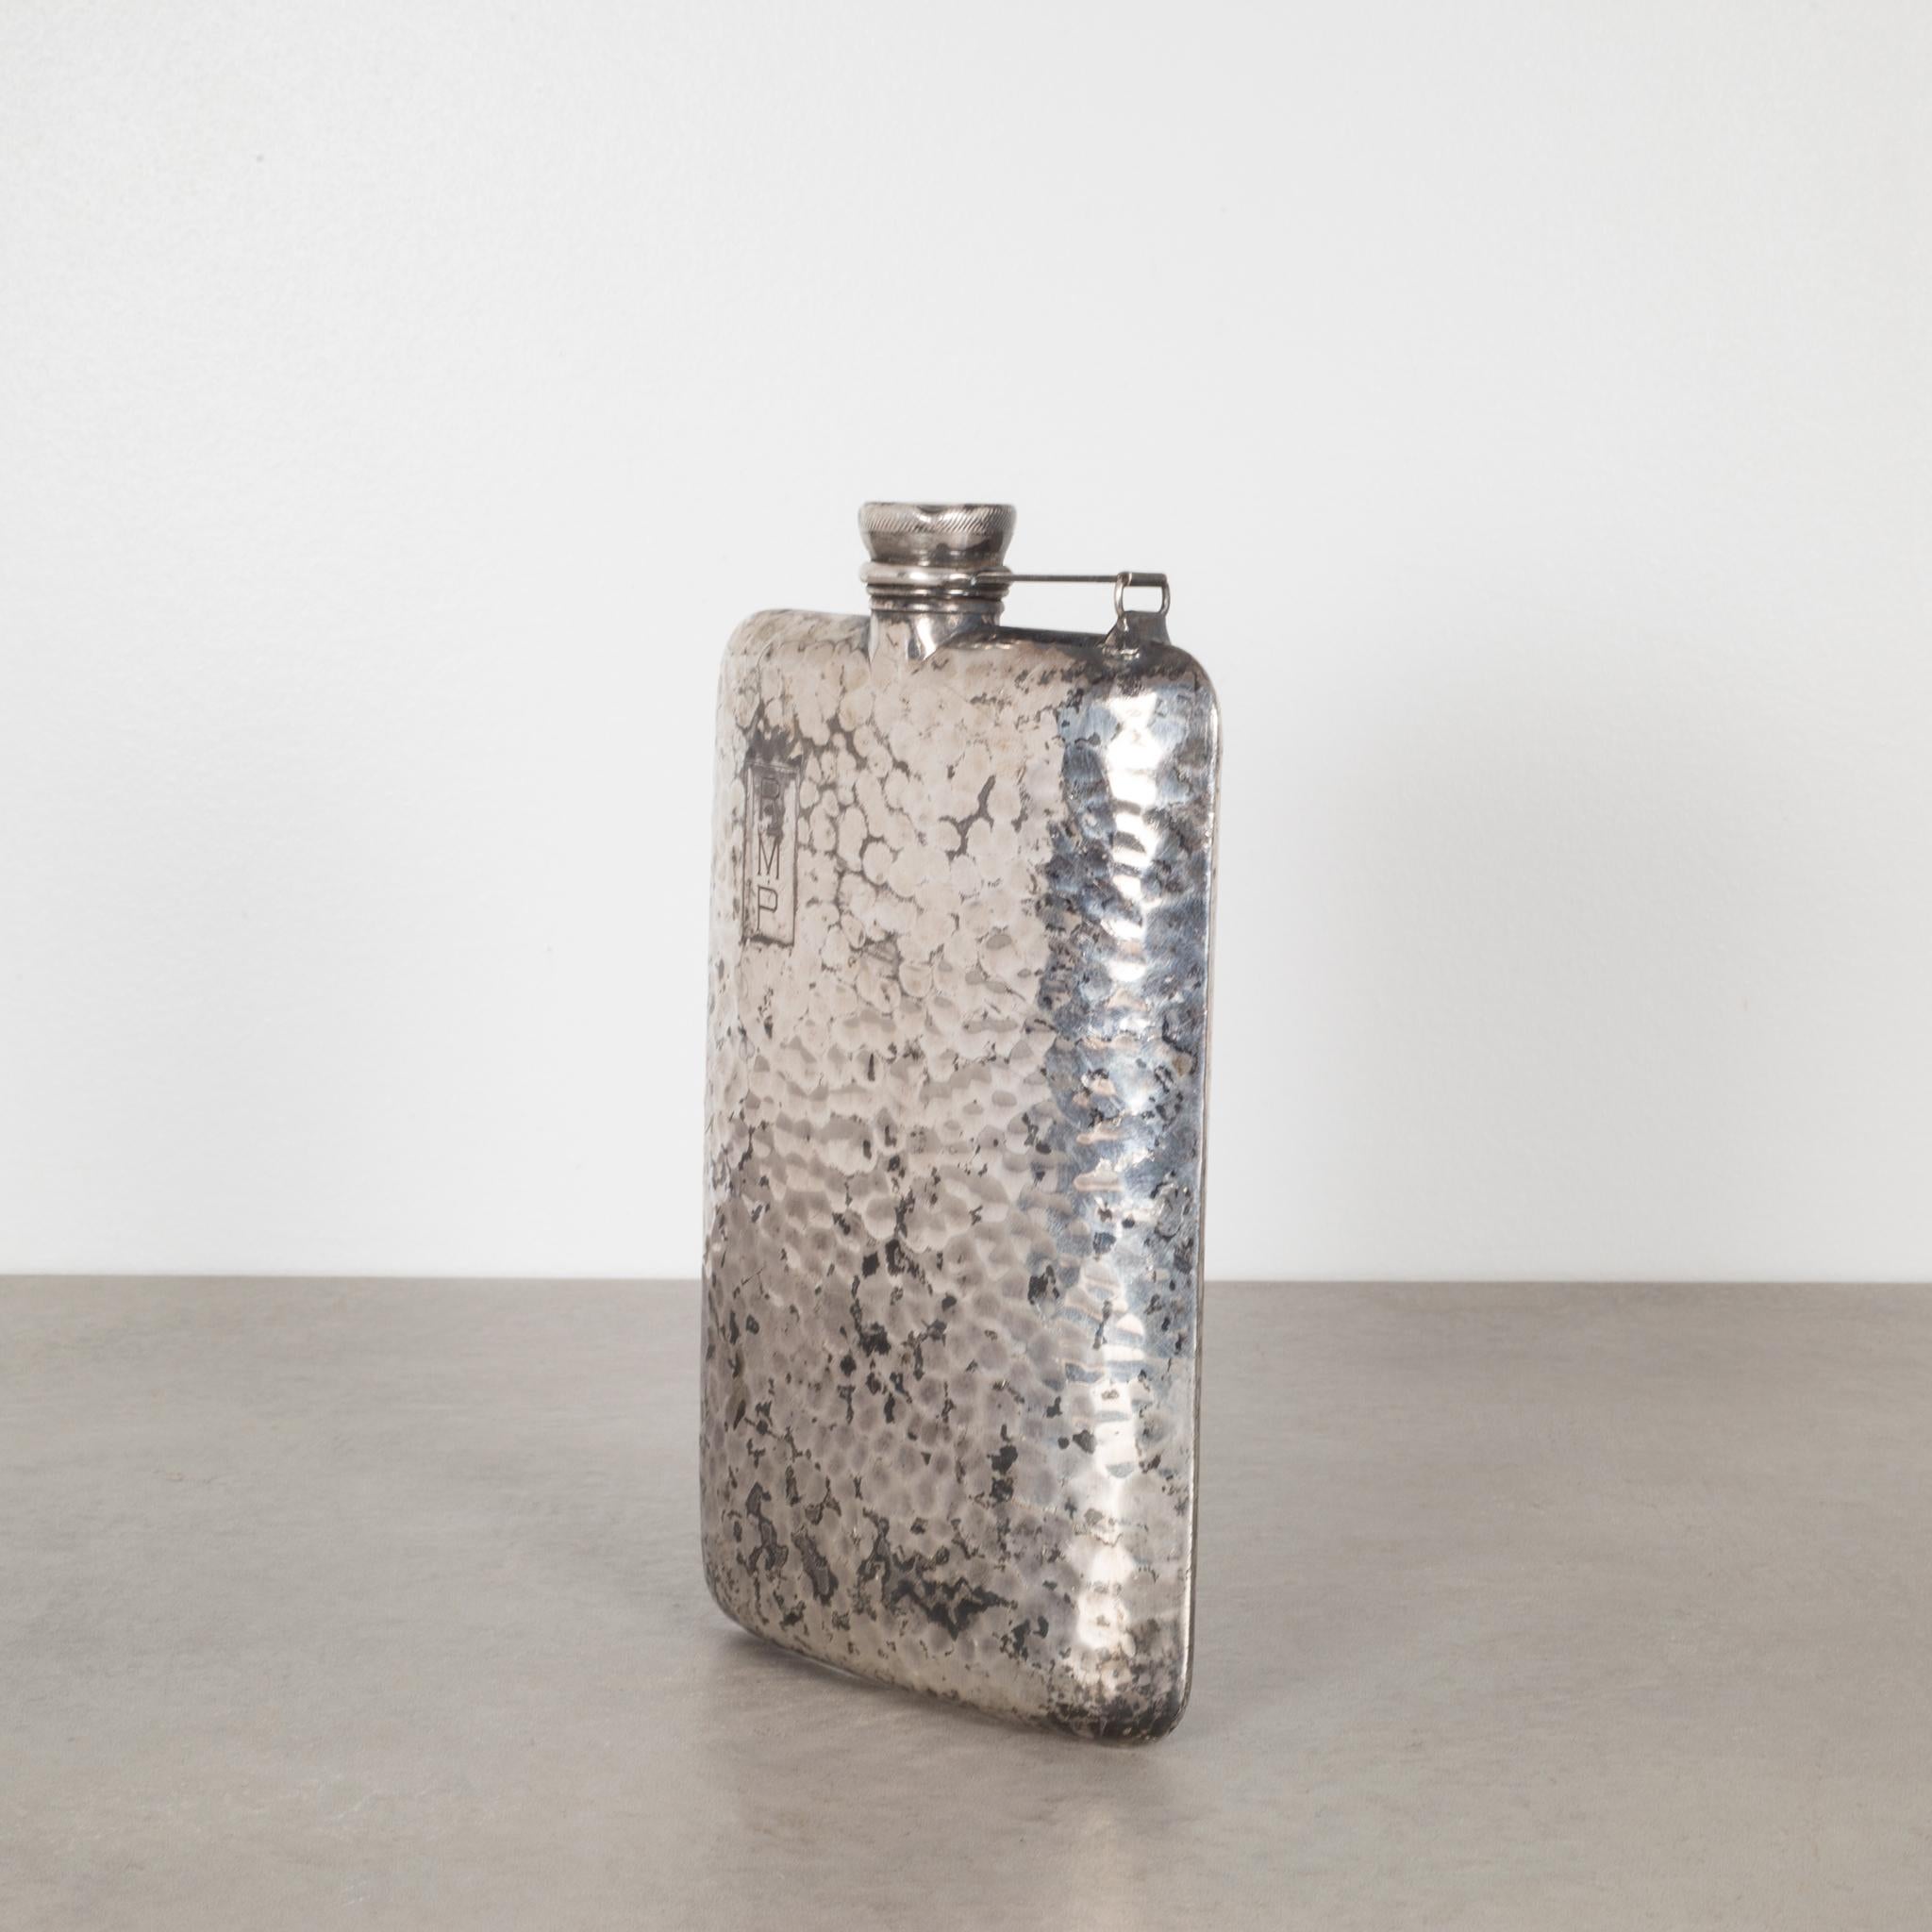 About

This is an original hammered silver plated flask by Apollo Silver Company. This large flask has a flip top with a cork interior. The company's logo is stamped inside the flip top and 